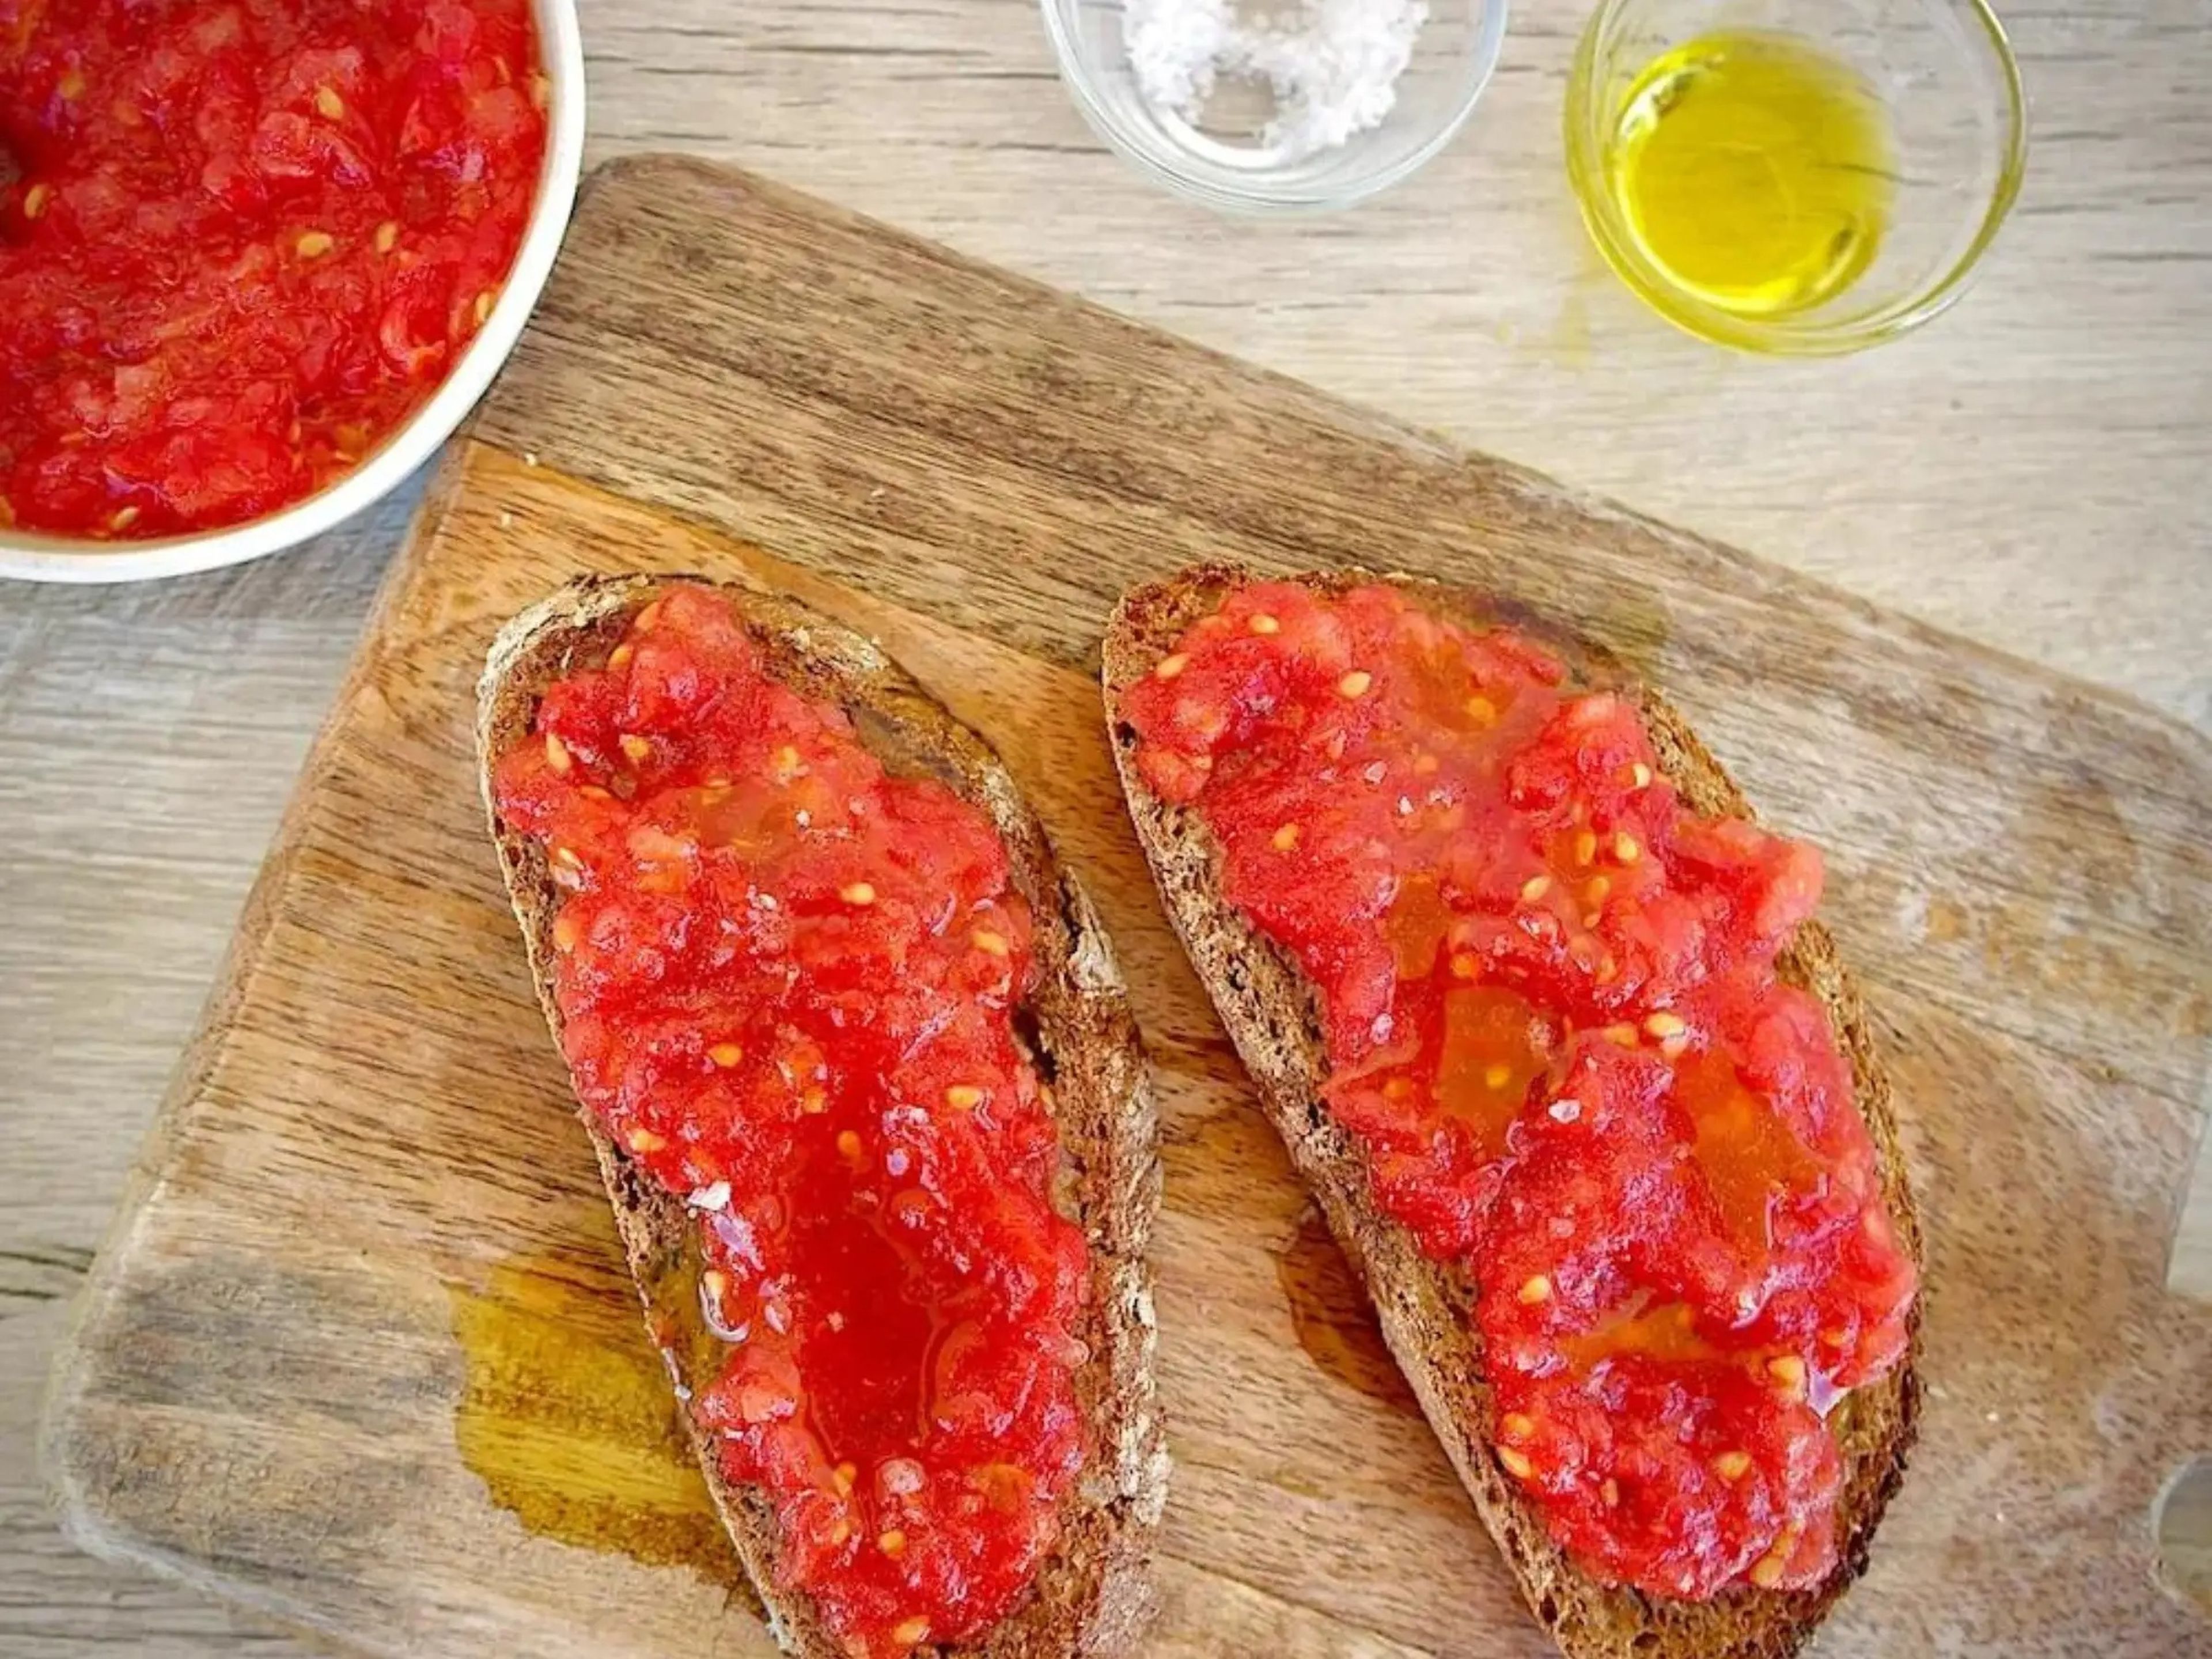 Pan con tomate on a wooden chopping board with bowls of tomato, salt and olive oil